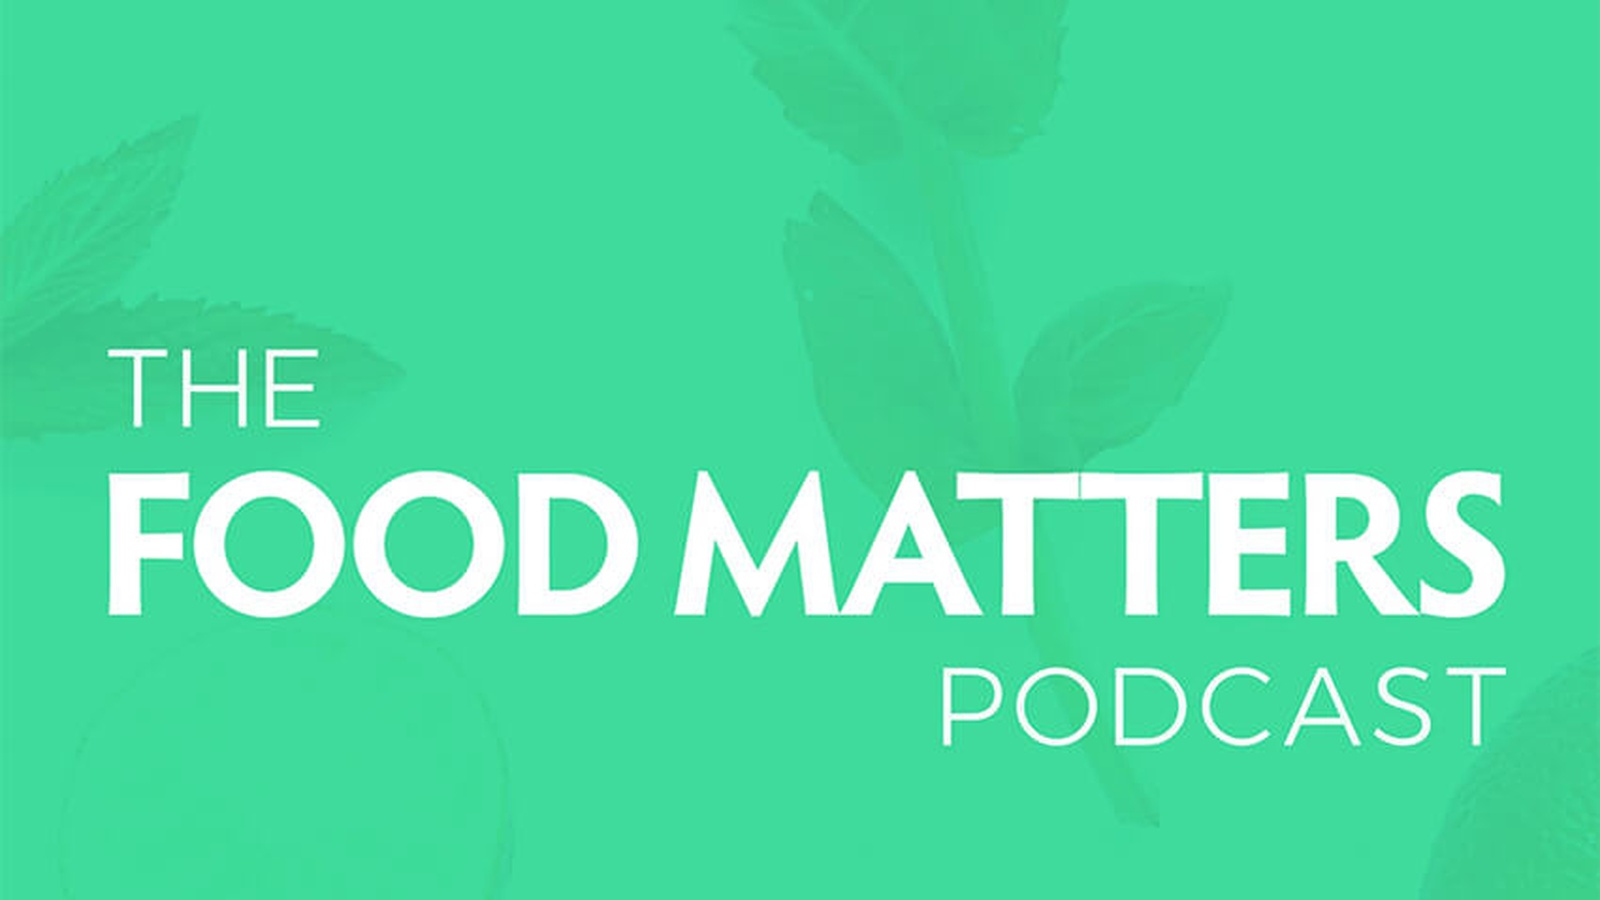 JUST LAUNCHED: The Food Matters Podcast!